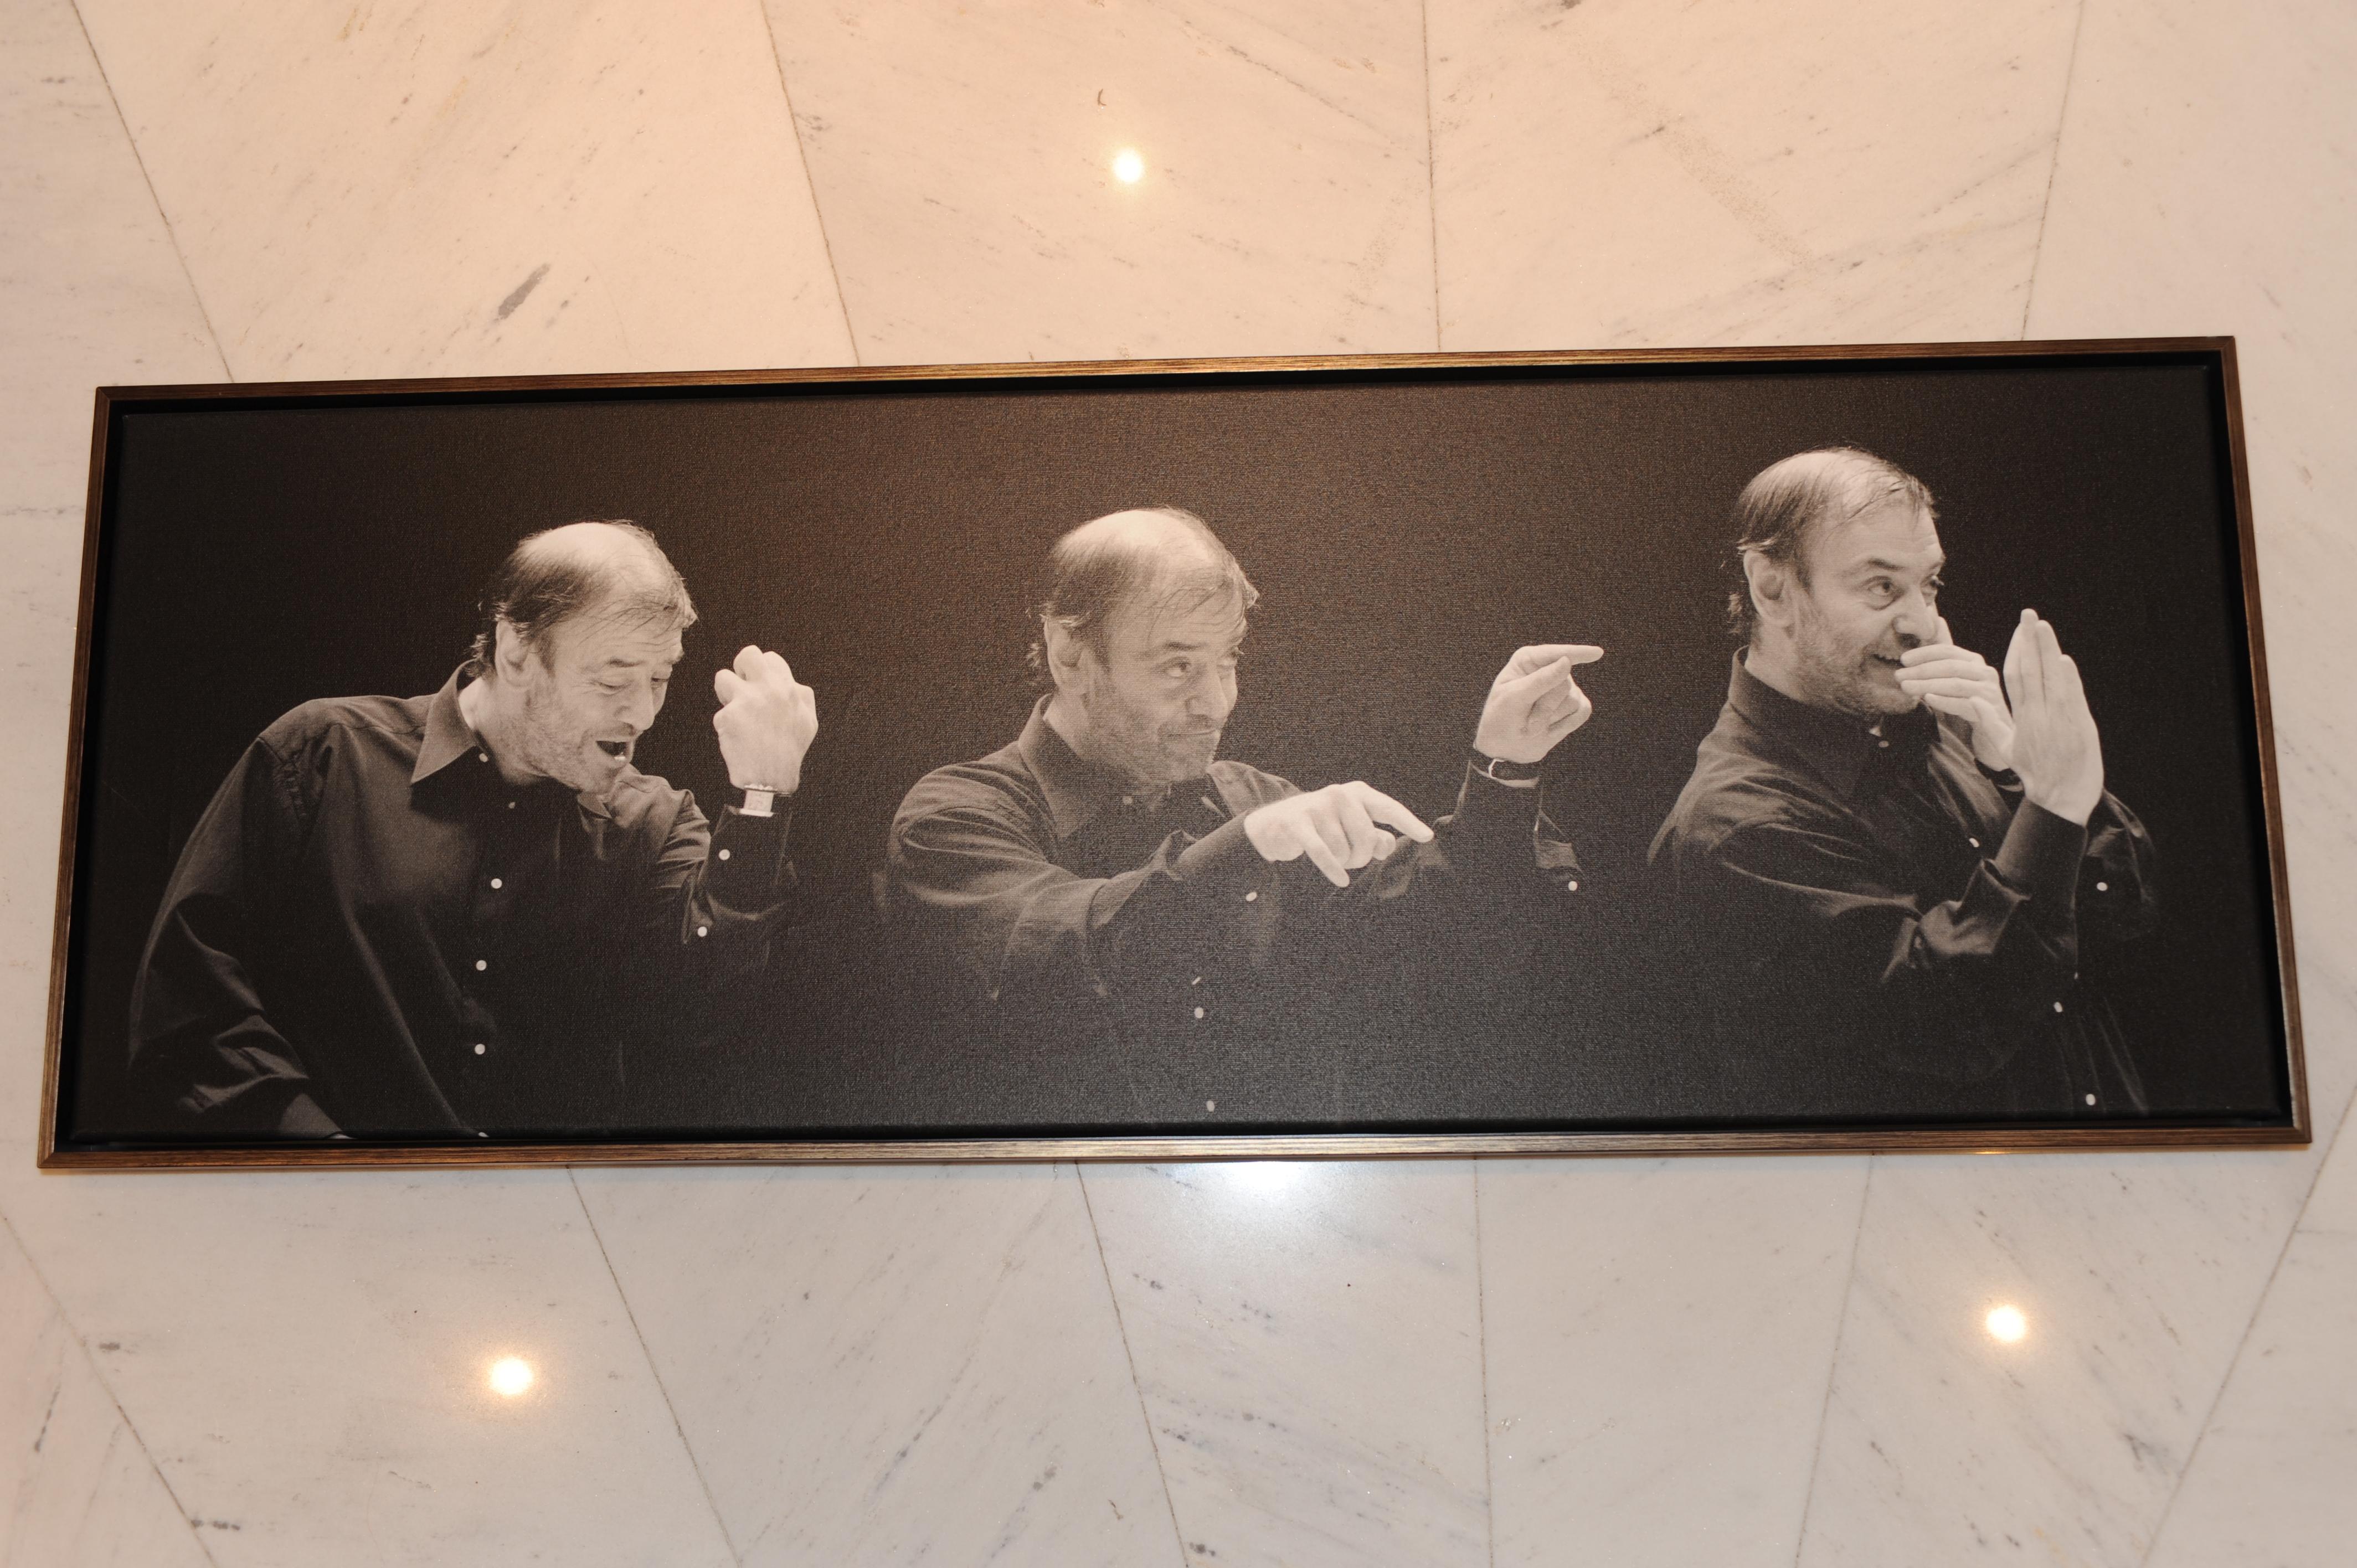 JEANETTE HANDLER Black and White Photograph - The famous conductor Valery Gergiev, Photo Art